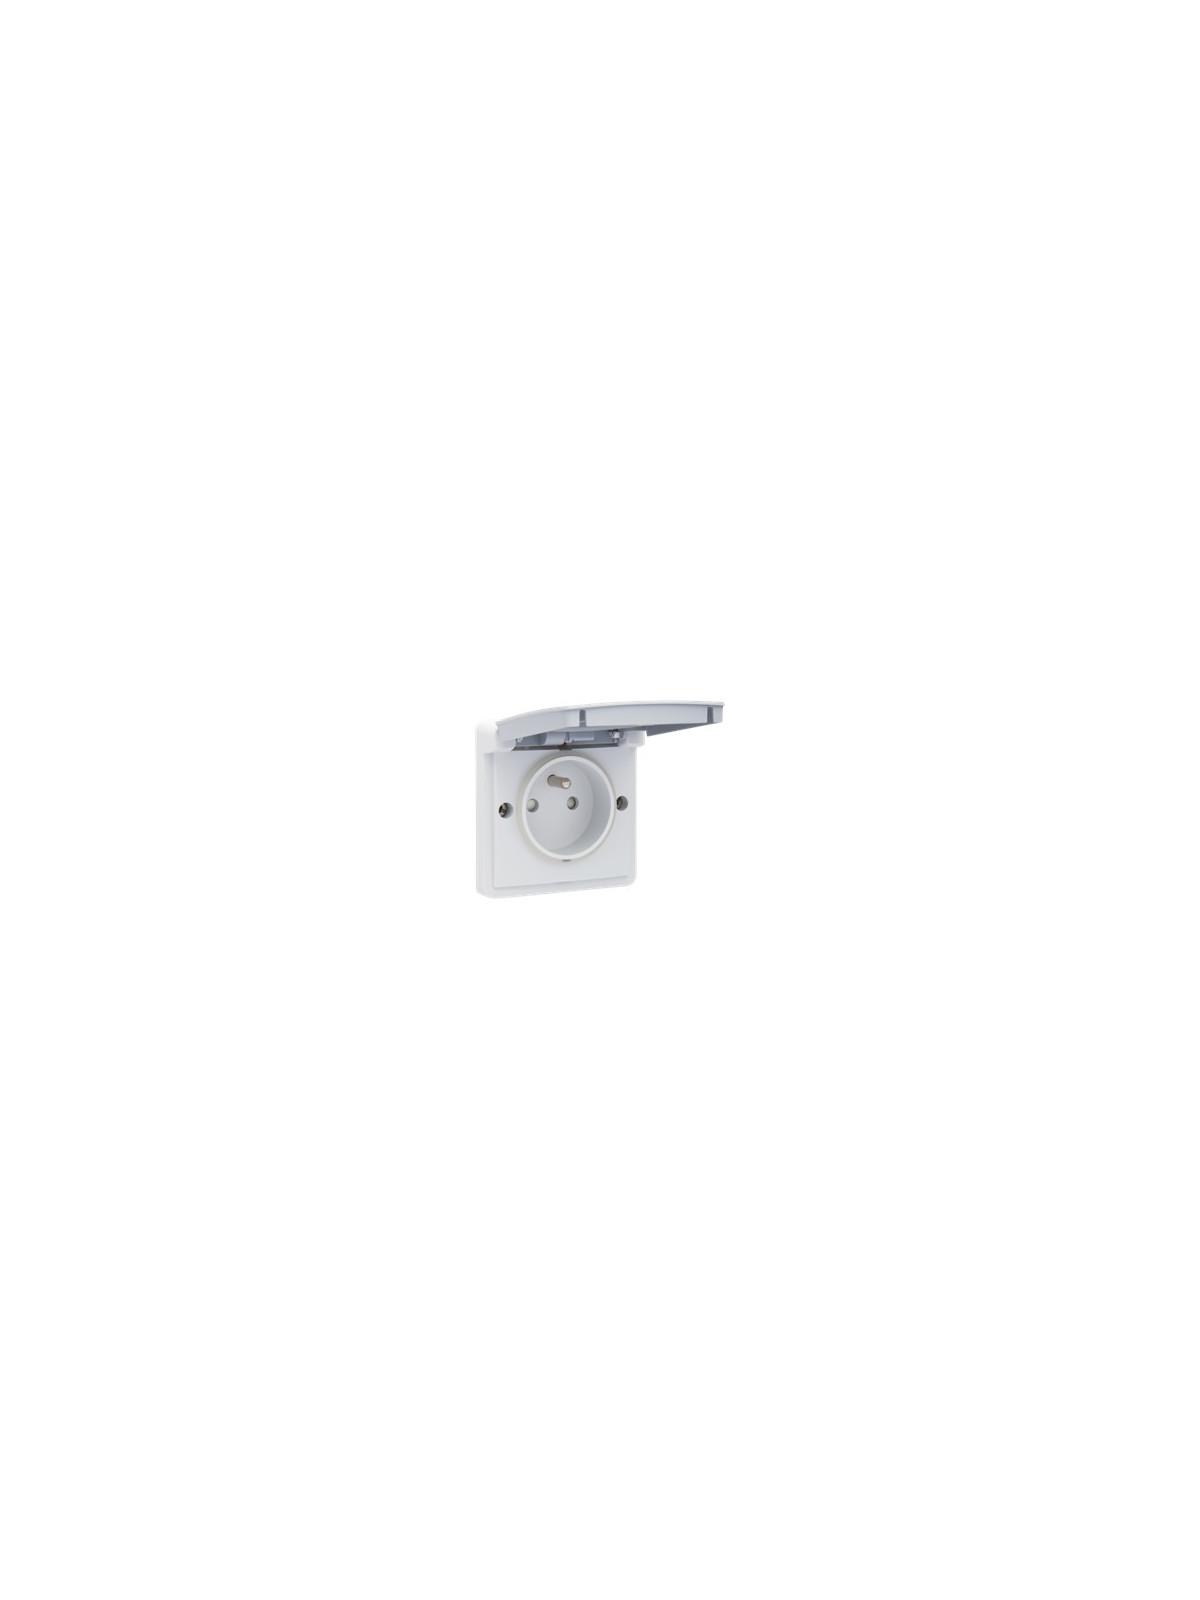 Surface-mounting socket outlet 16 A - 250 V AC